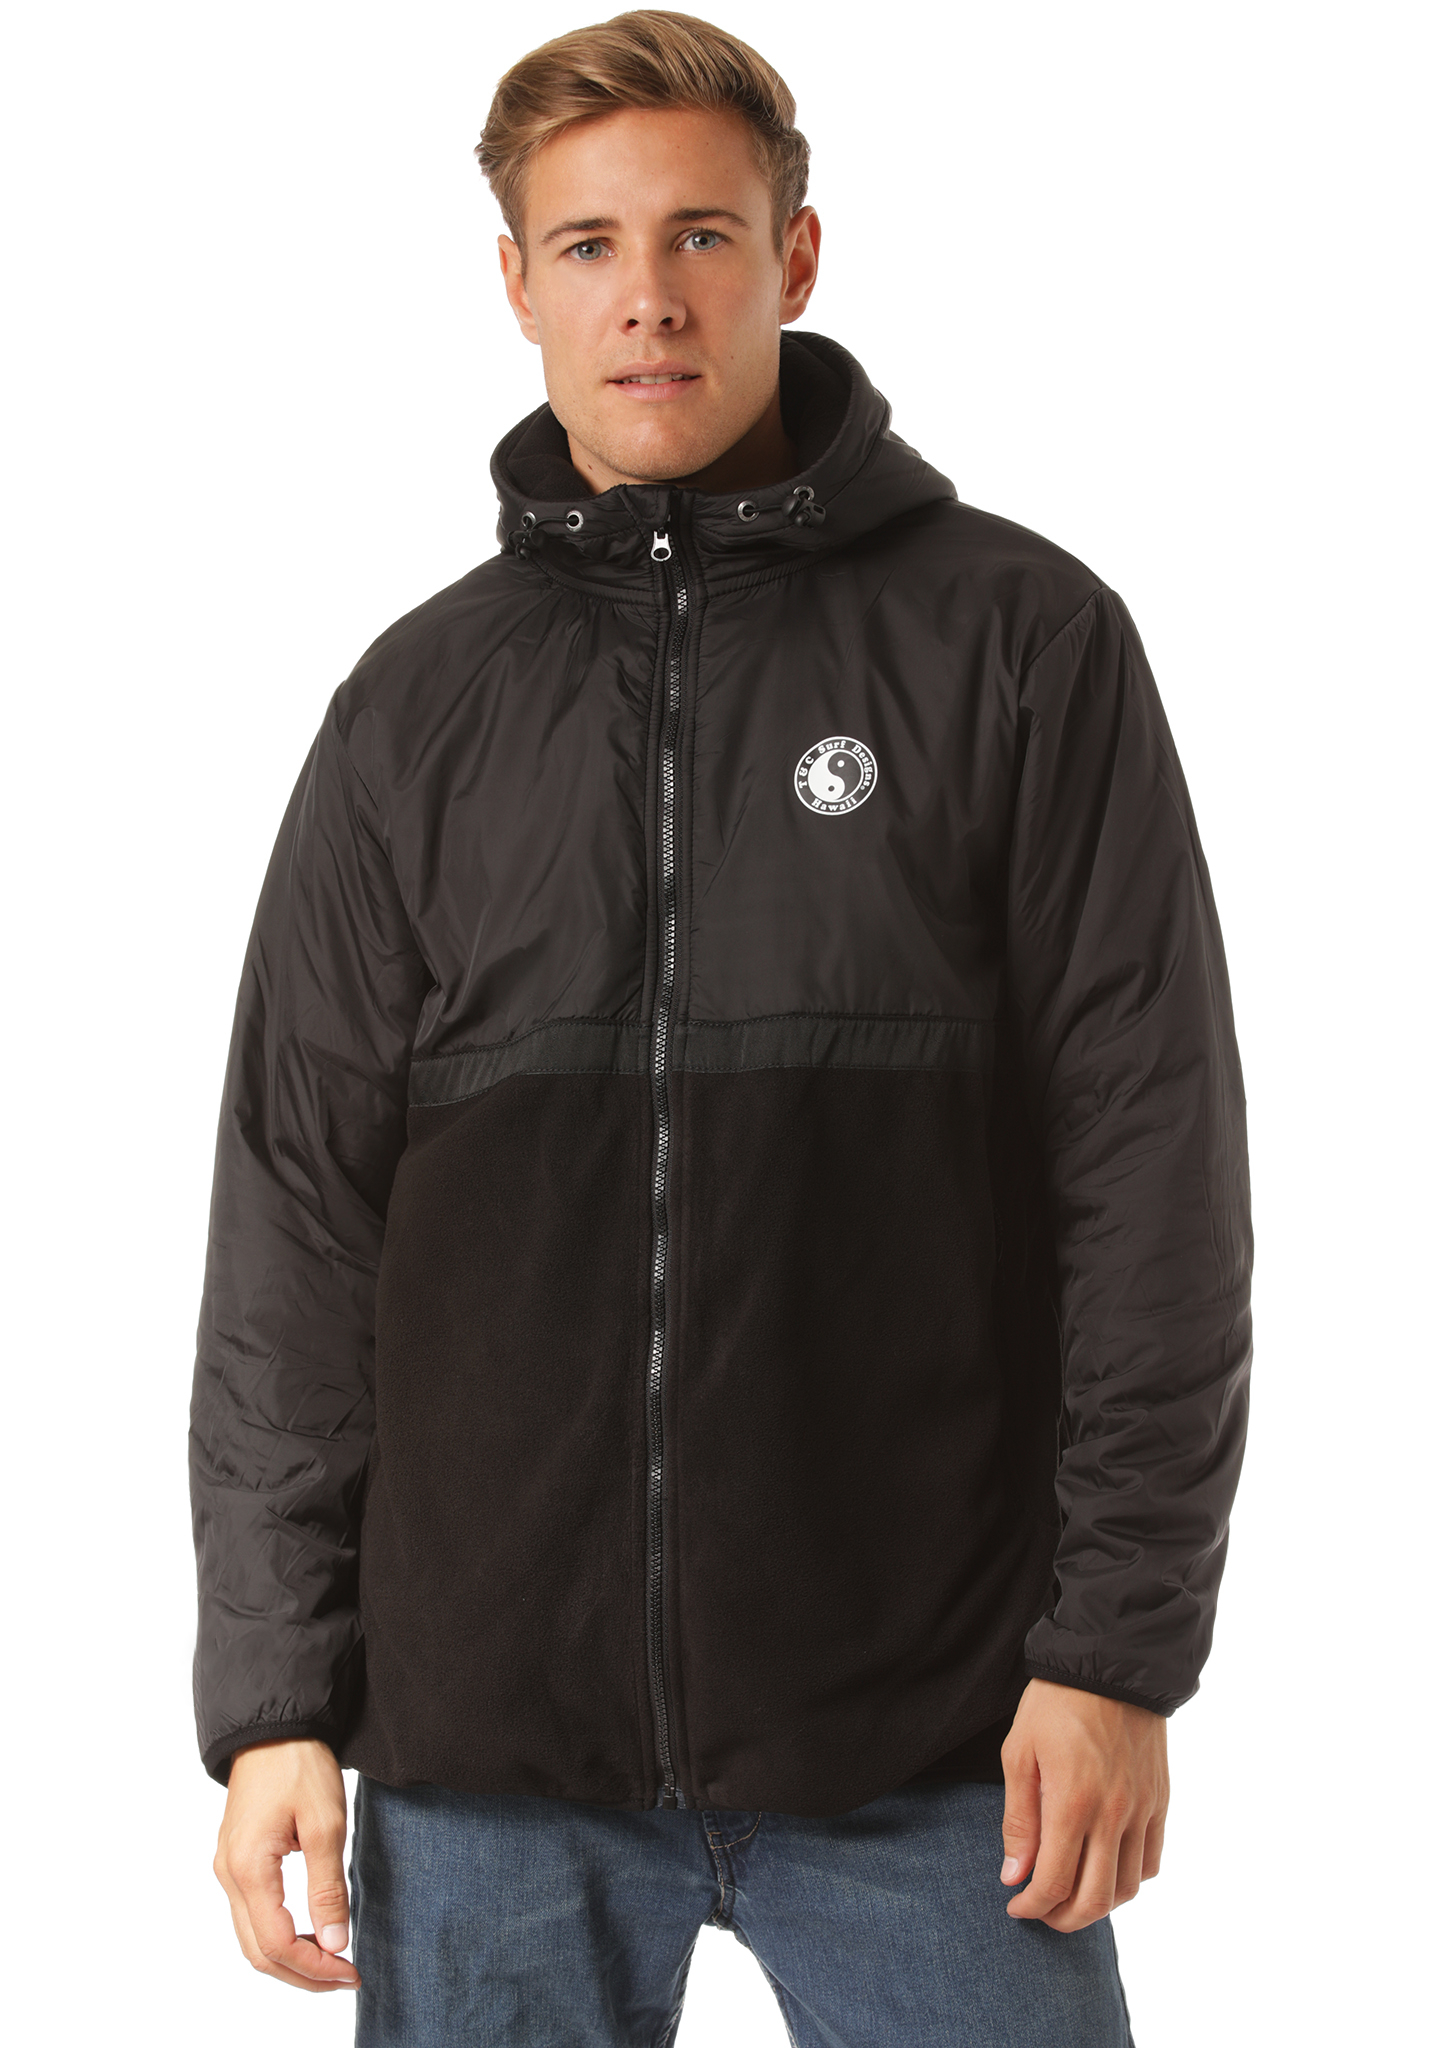 Town & Country Surf Designs Zone Hybric Jacke black XL